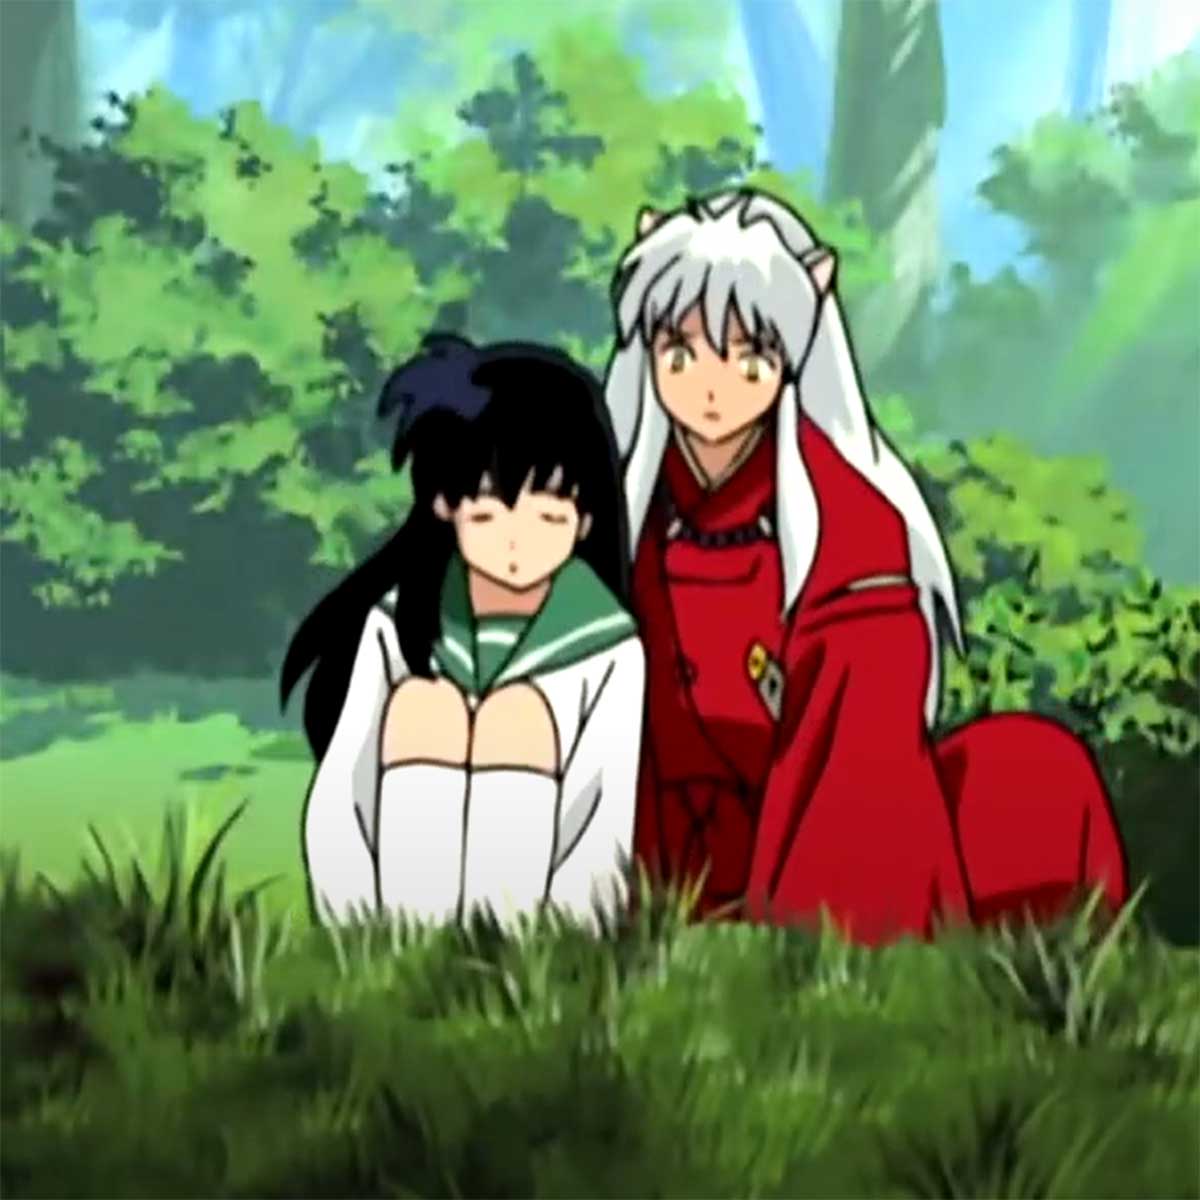 Play Affections Across Time (Inuyasha) | Music on Virtual Piano